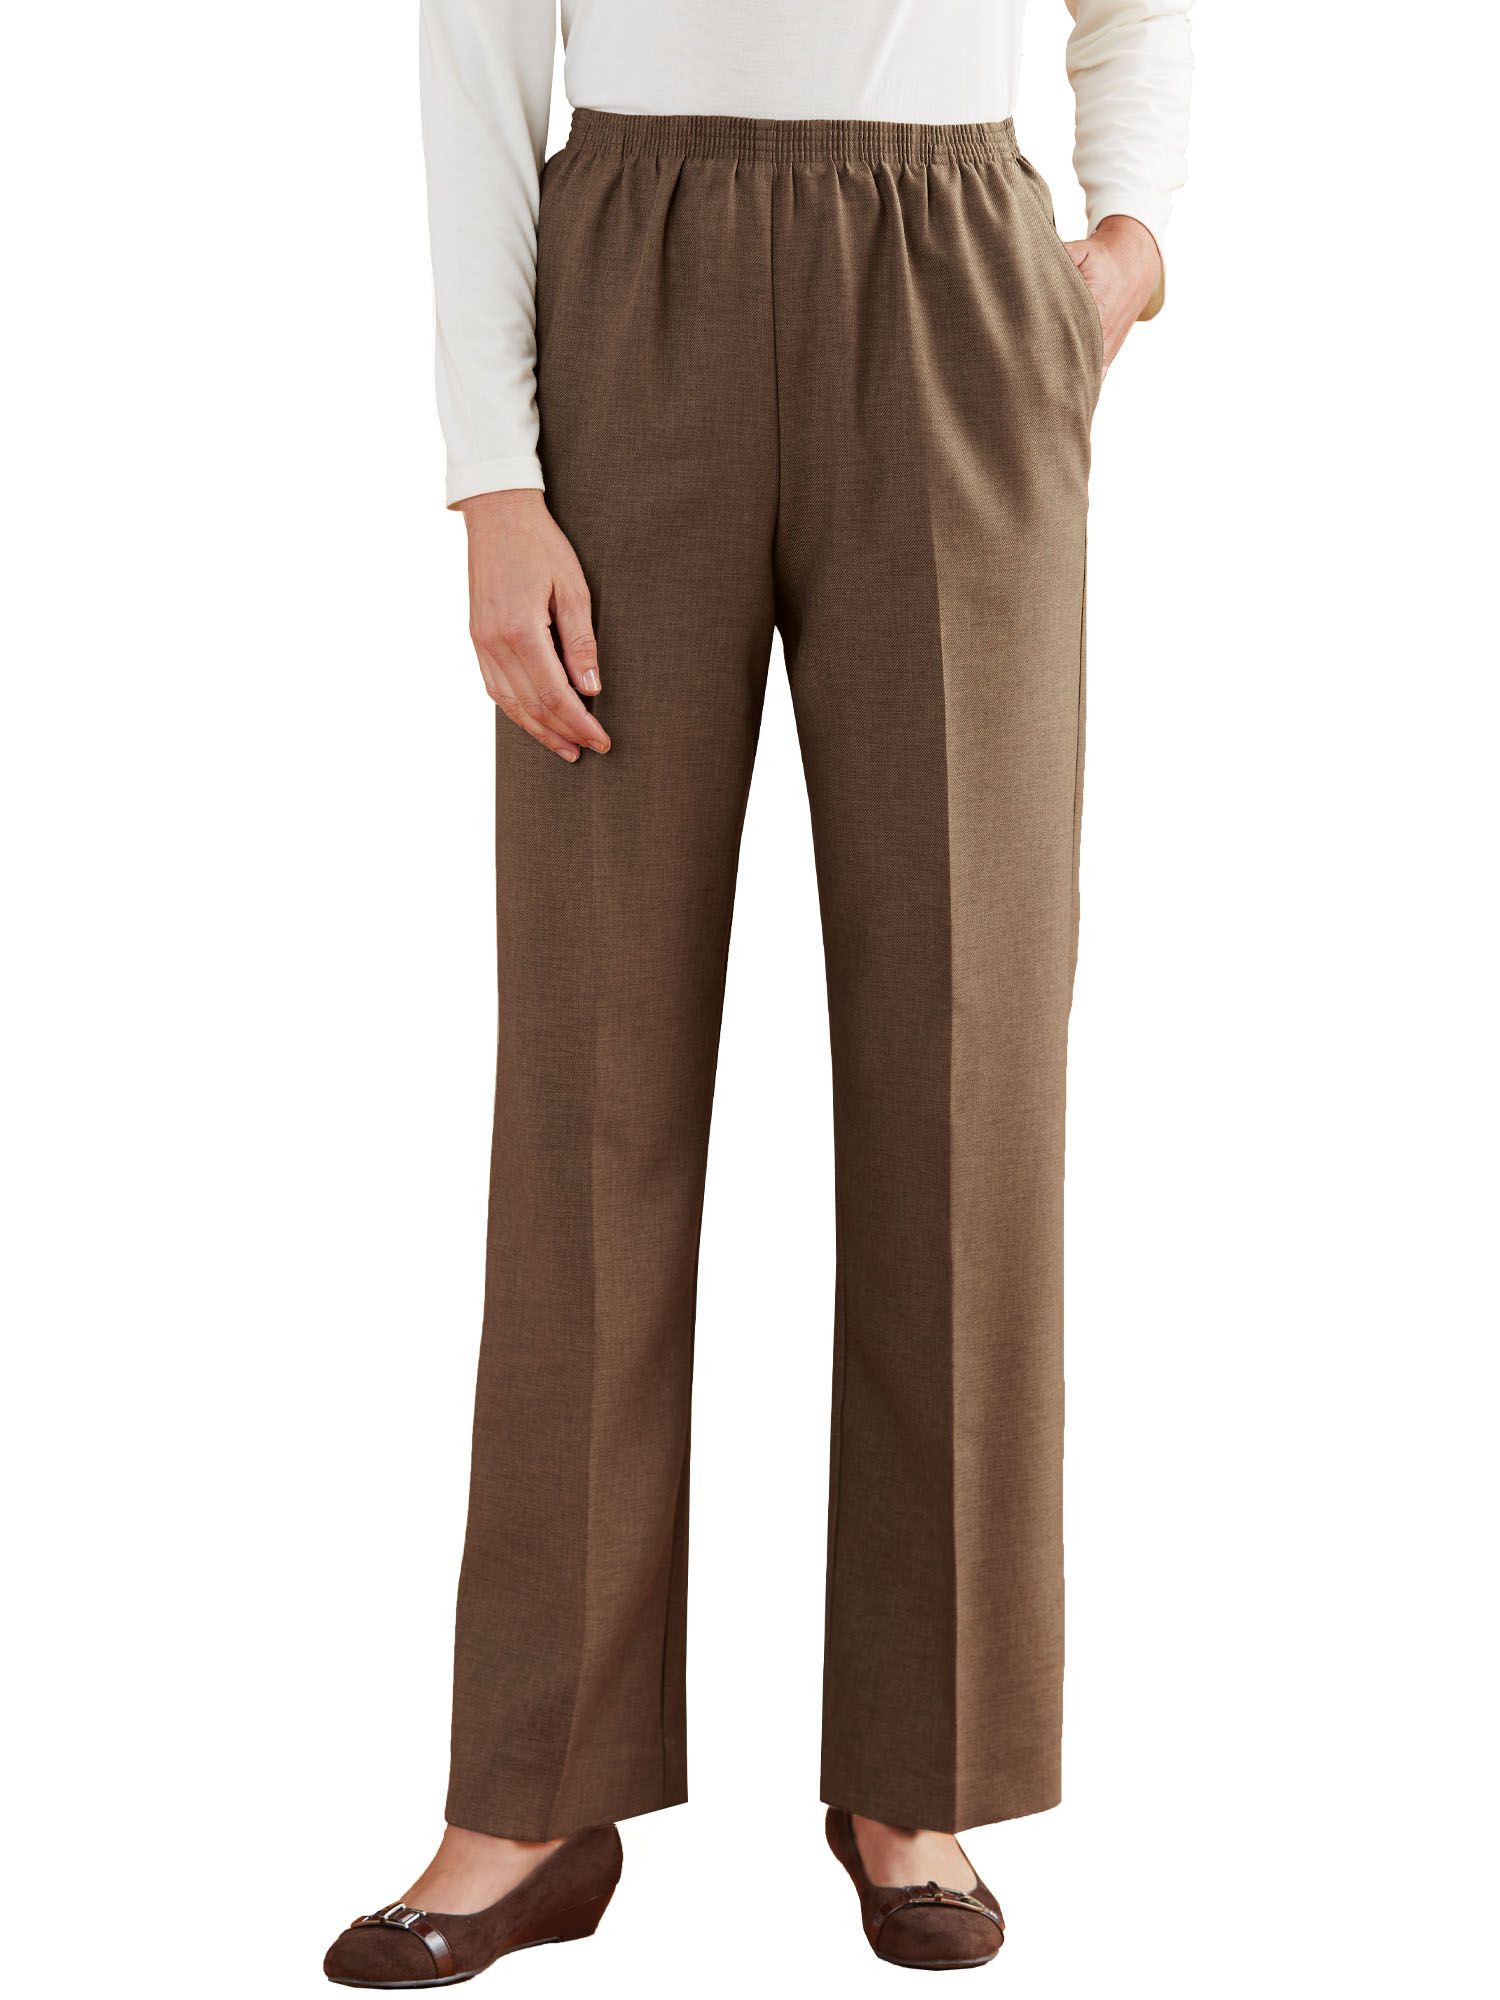 Alfred Dunner Womens Casual Pants Size 8 MD Tan Pull On Elastic Waist Pockets